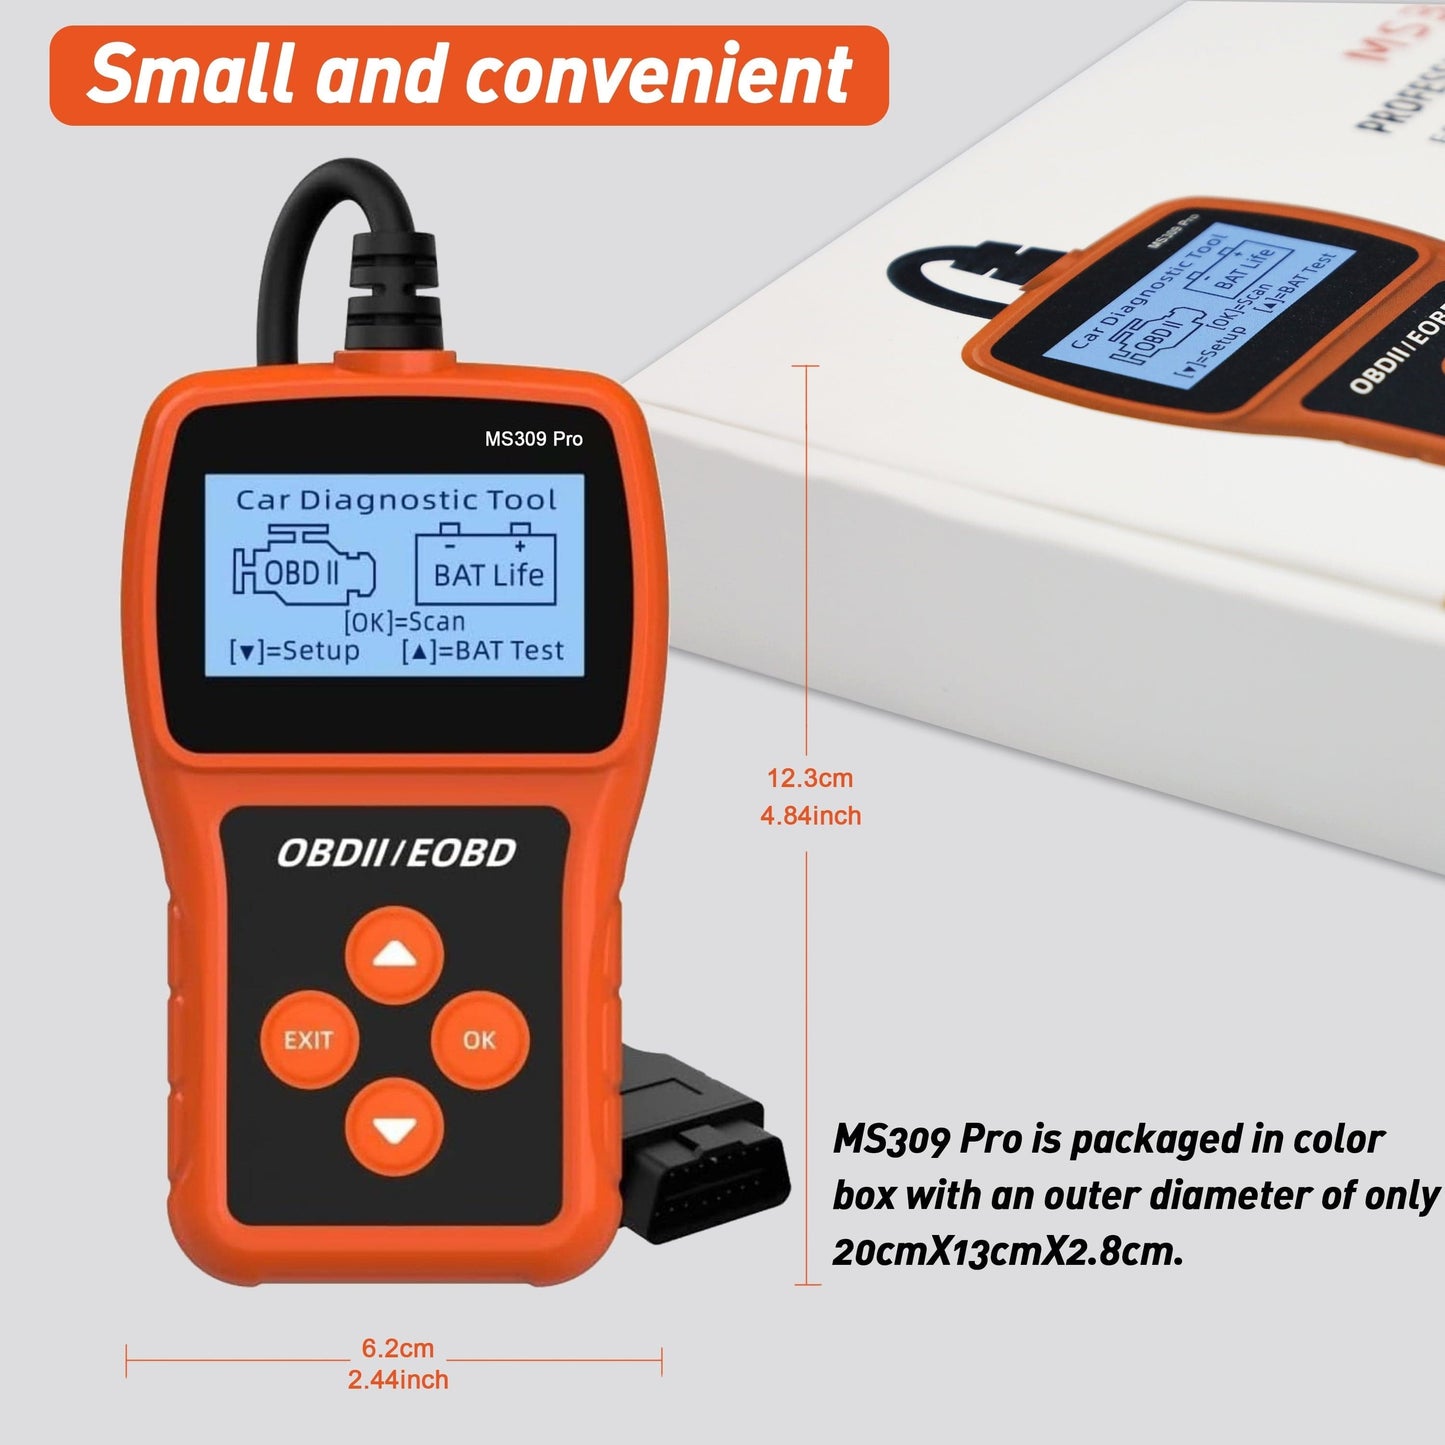 Auto OBD2 Scanner: Check Your Car's Health & Battery With This Diagnostic Scan Tool!